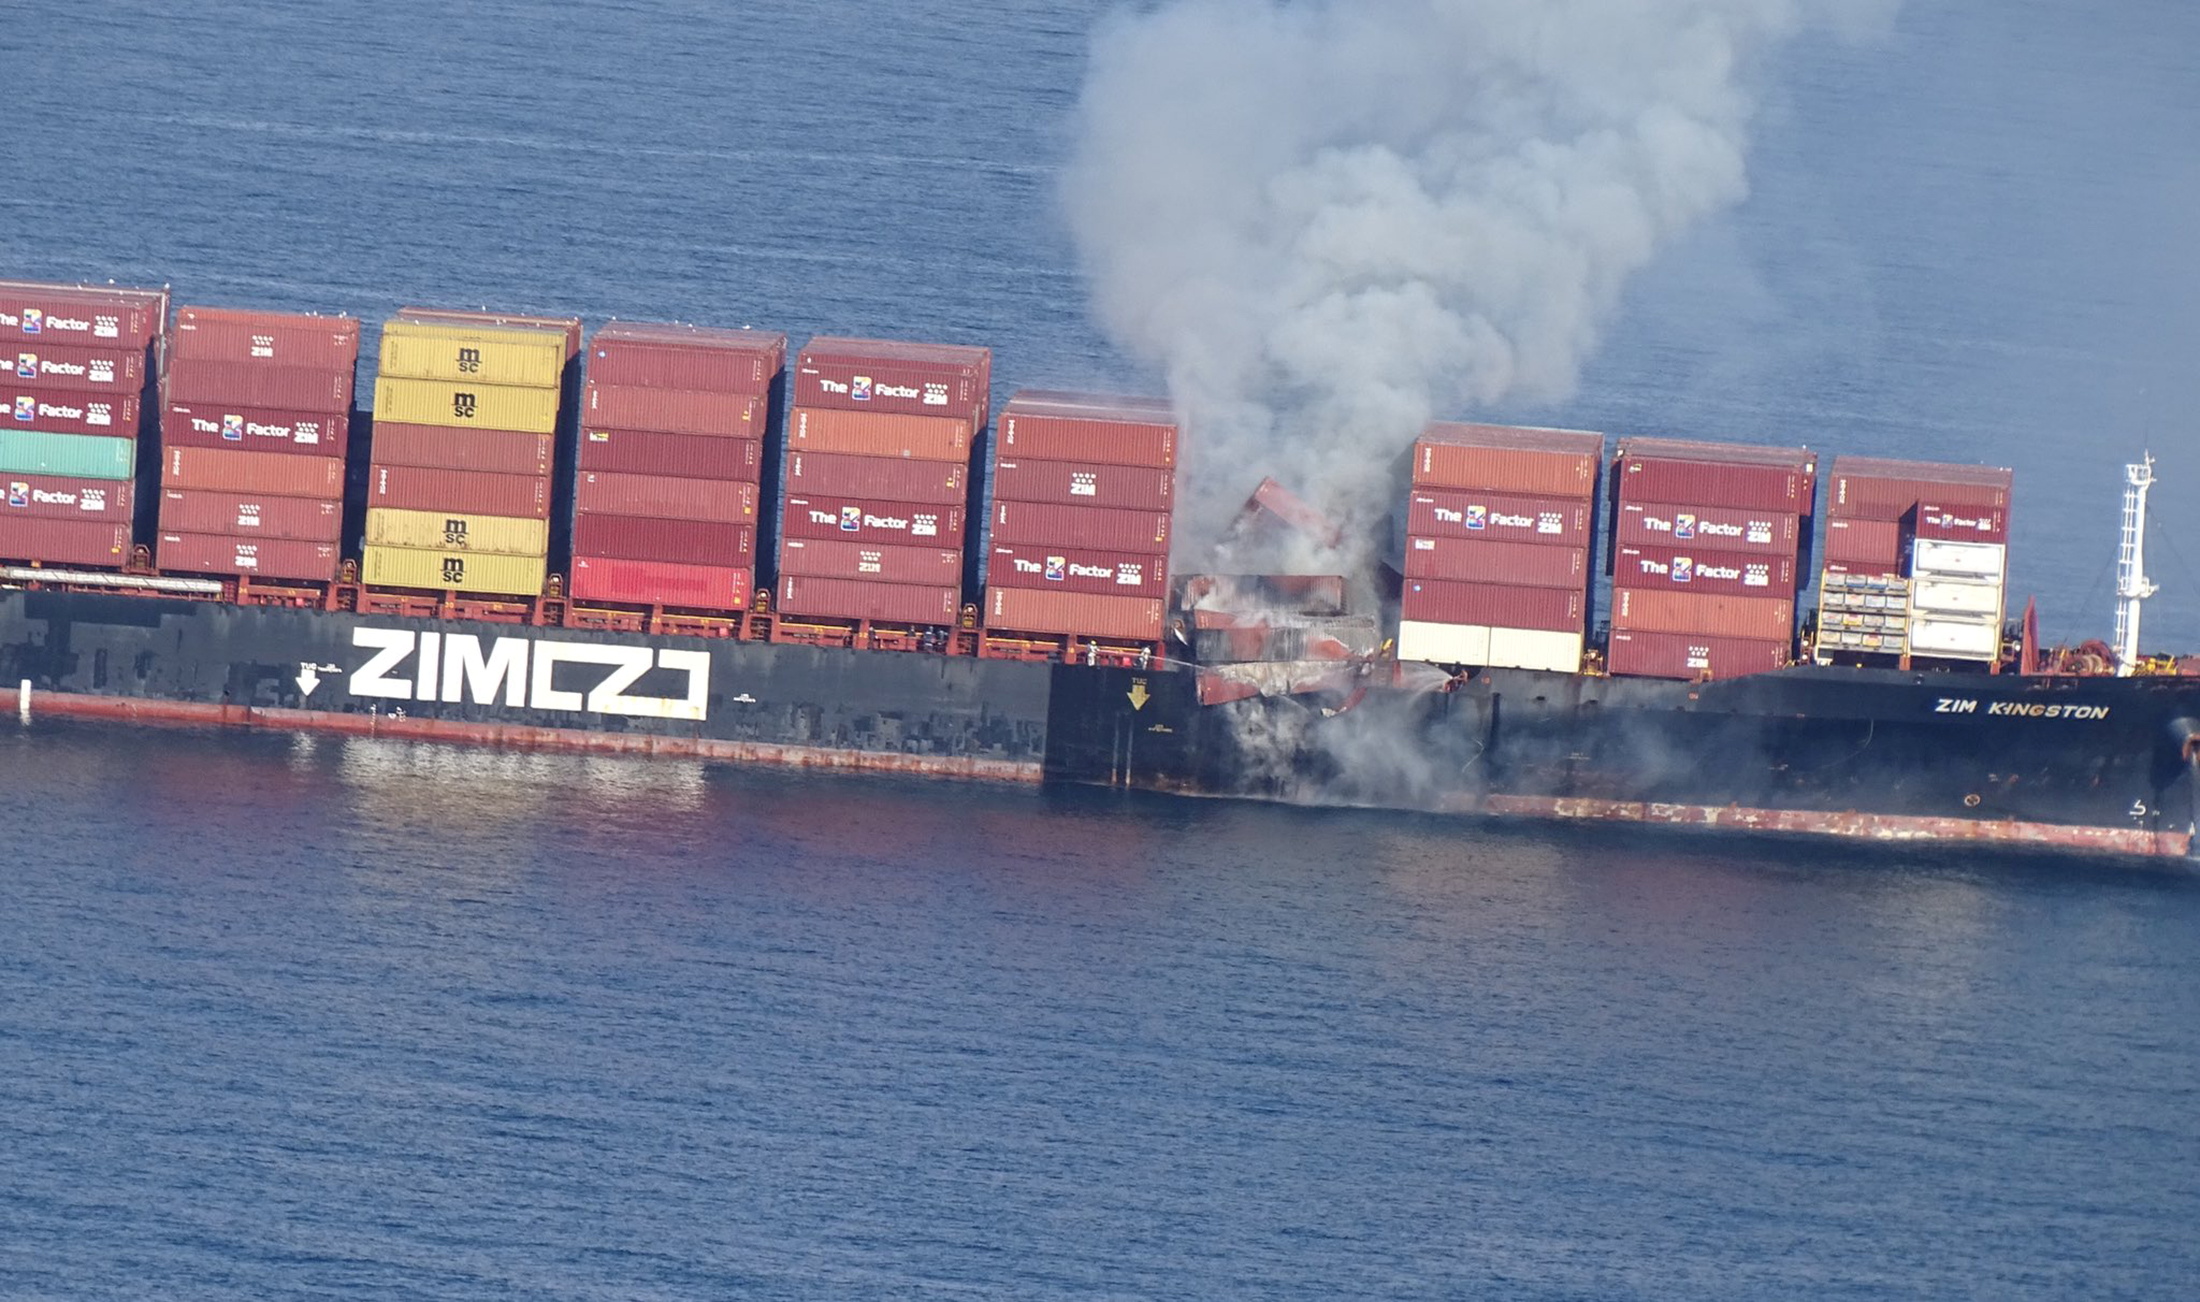 The container ship Zim Kingston burns from a fire off the coast of Victoria